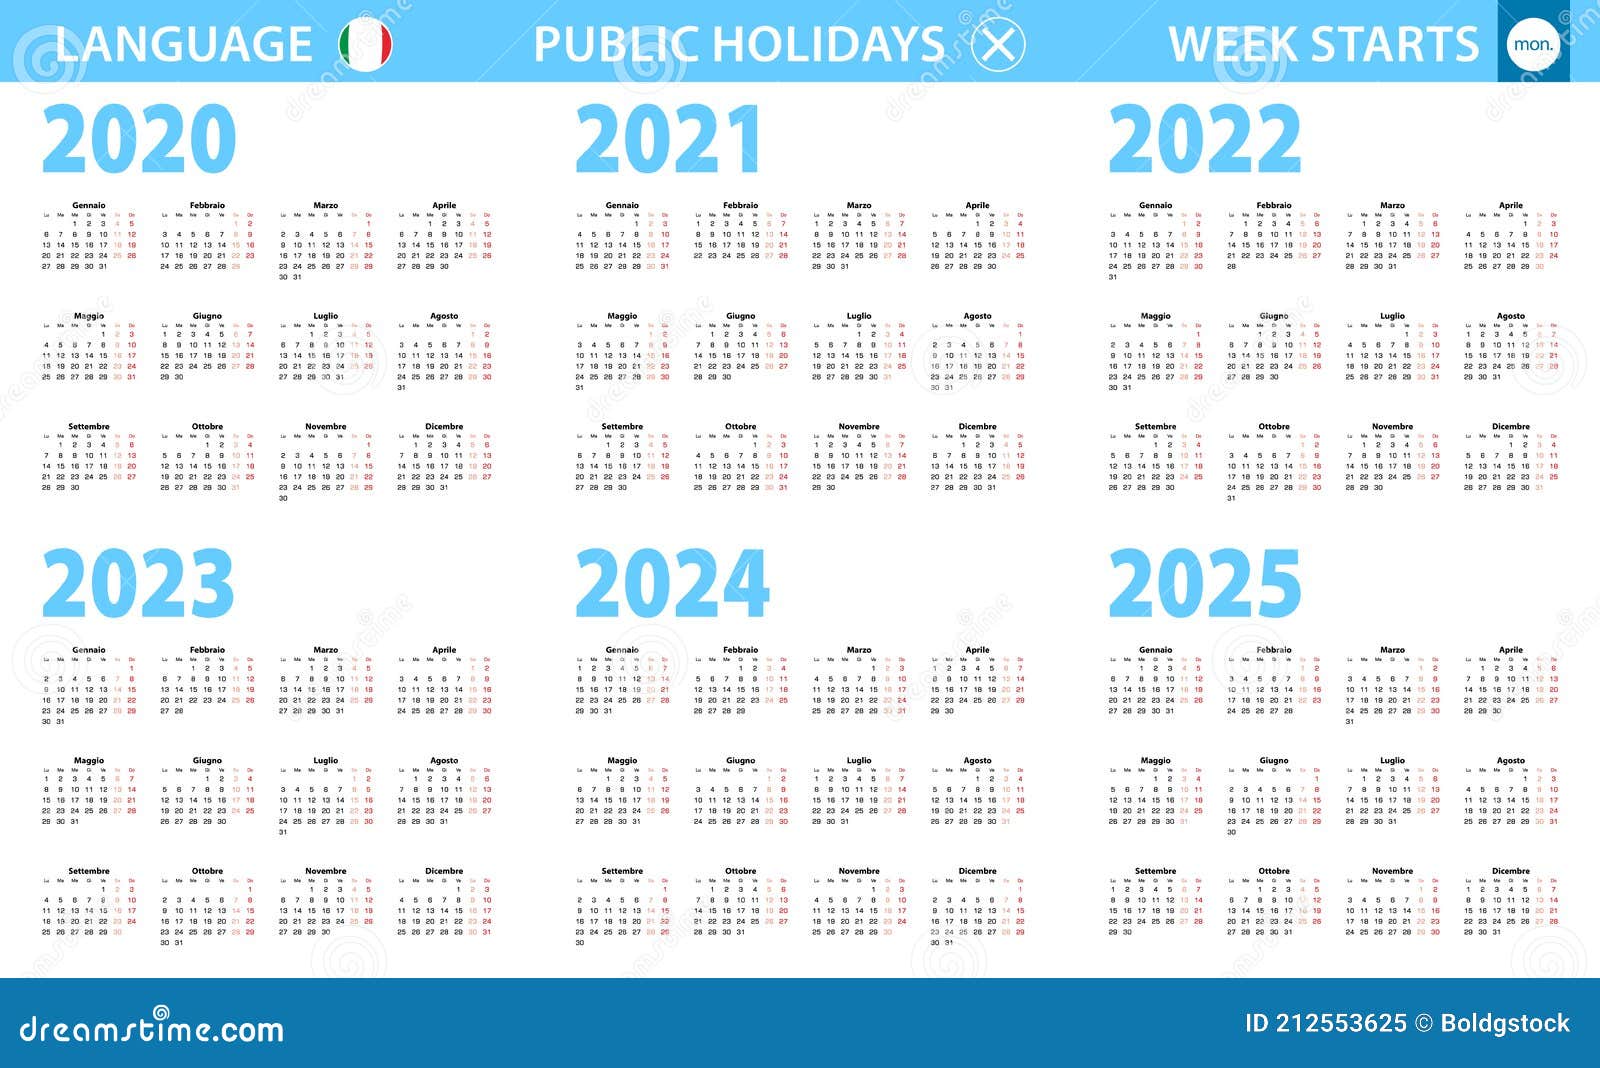 calendar-in-italian-language-for-year-2020-2021-2022-2023-2024-2025-week-starts-from